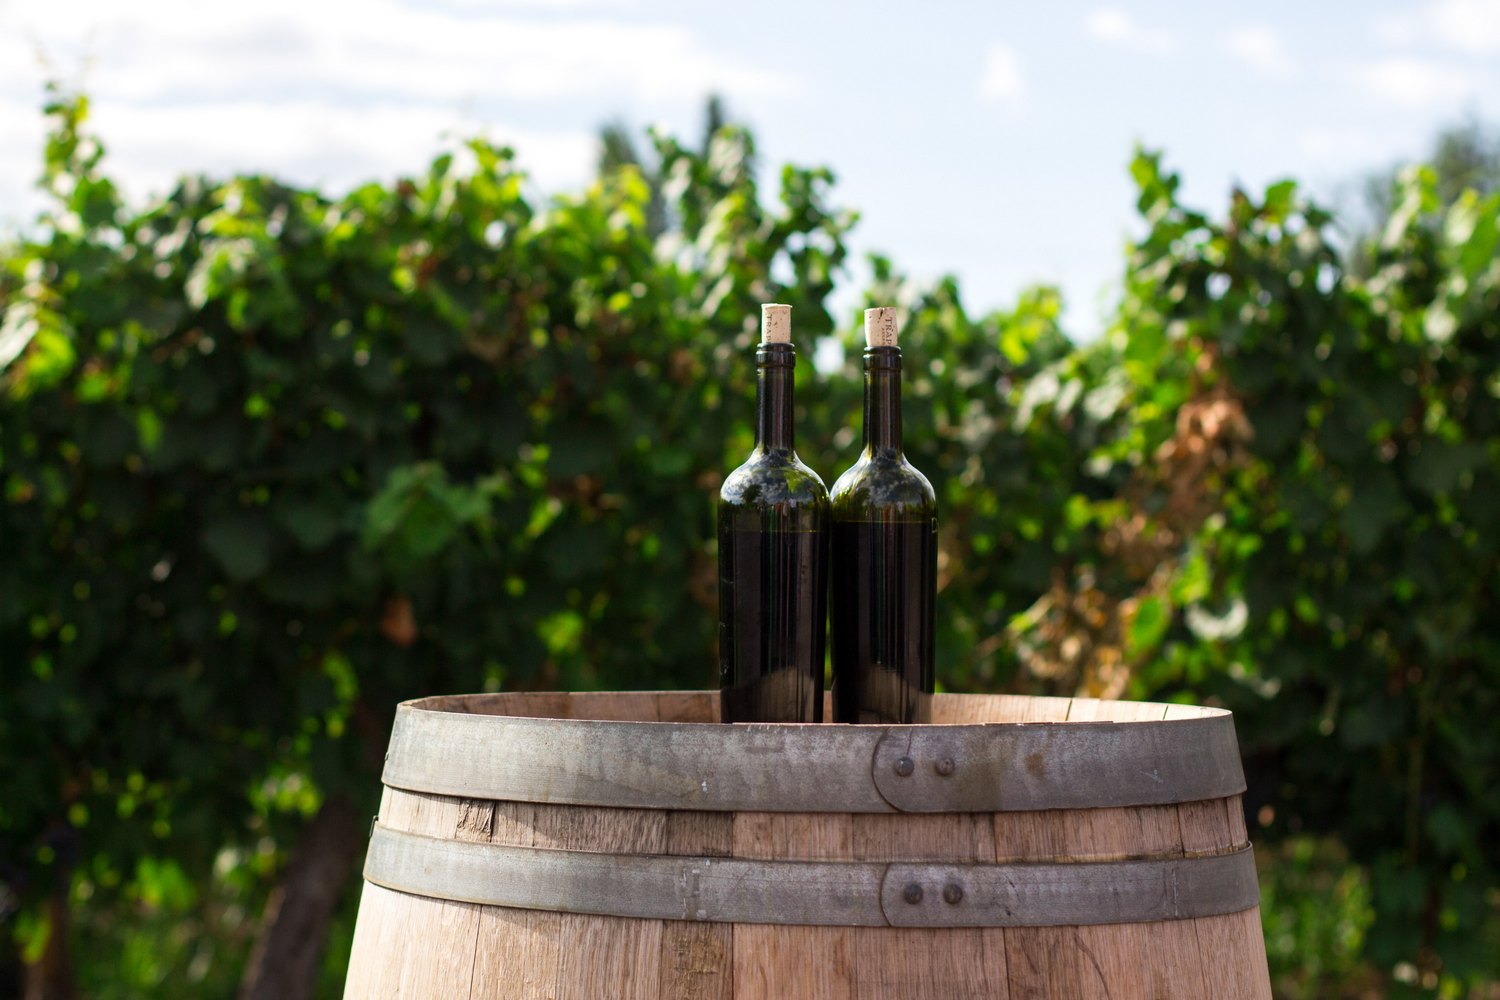 Two bottles of wine sit on top of a wooden barrel.